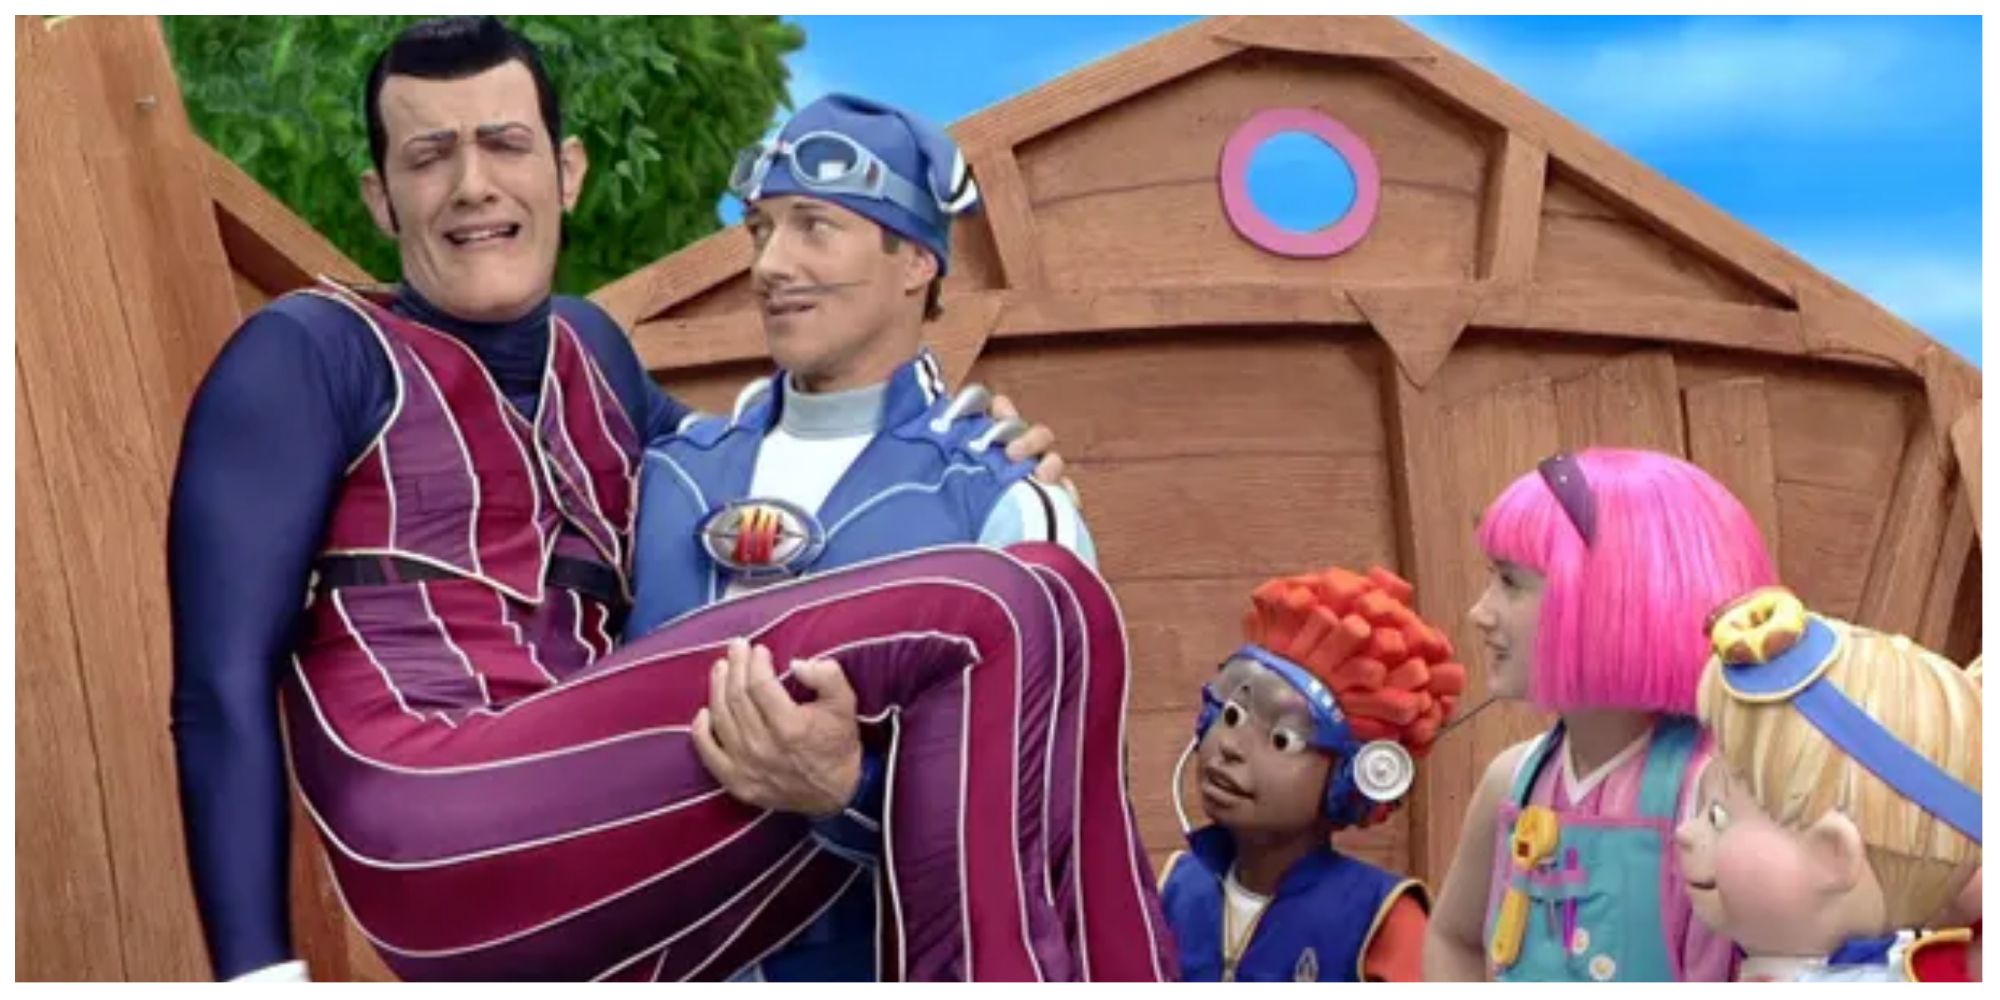 Stephanie, Sportacus, and Robbie Rotten in LazyTown